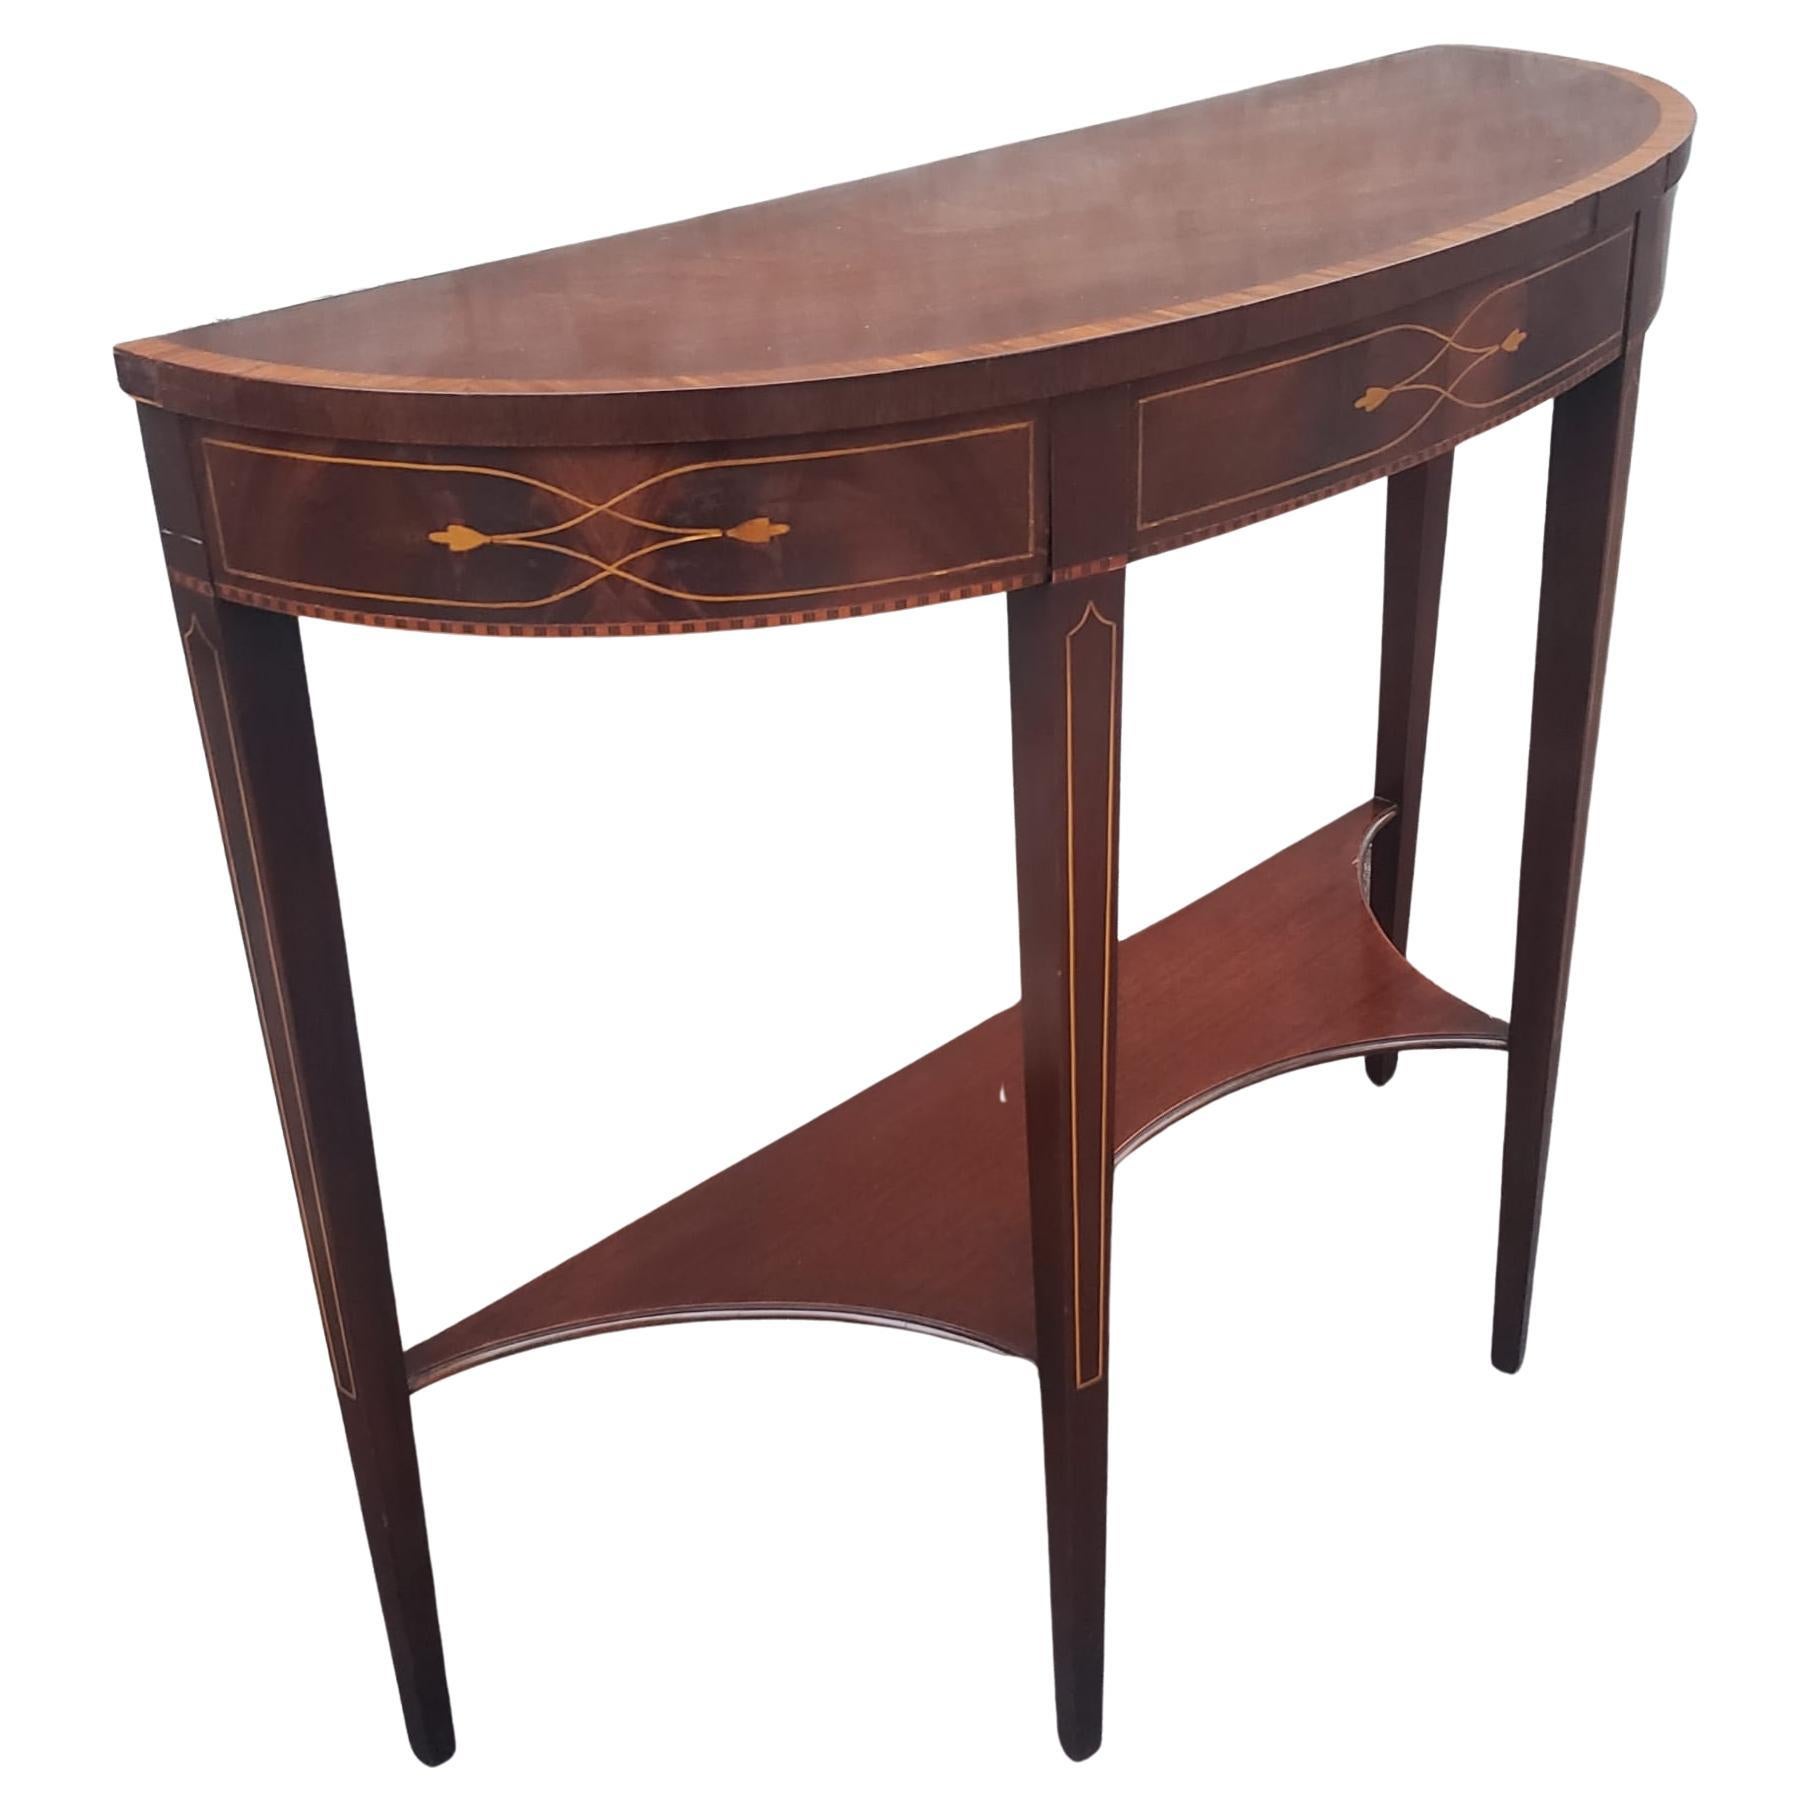 American 1930s Federal Two-Tier Mahogany and Satinwood Inlaid Demilune Console Table